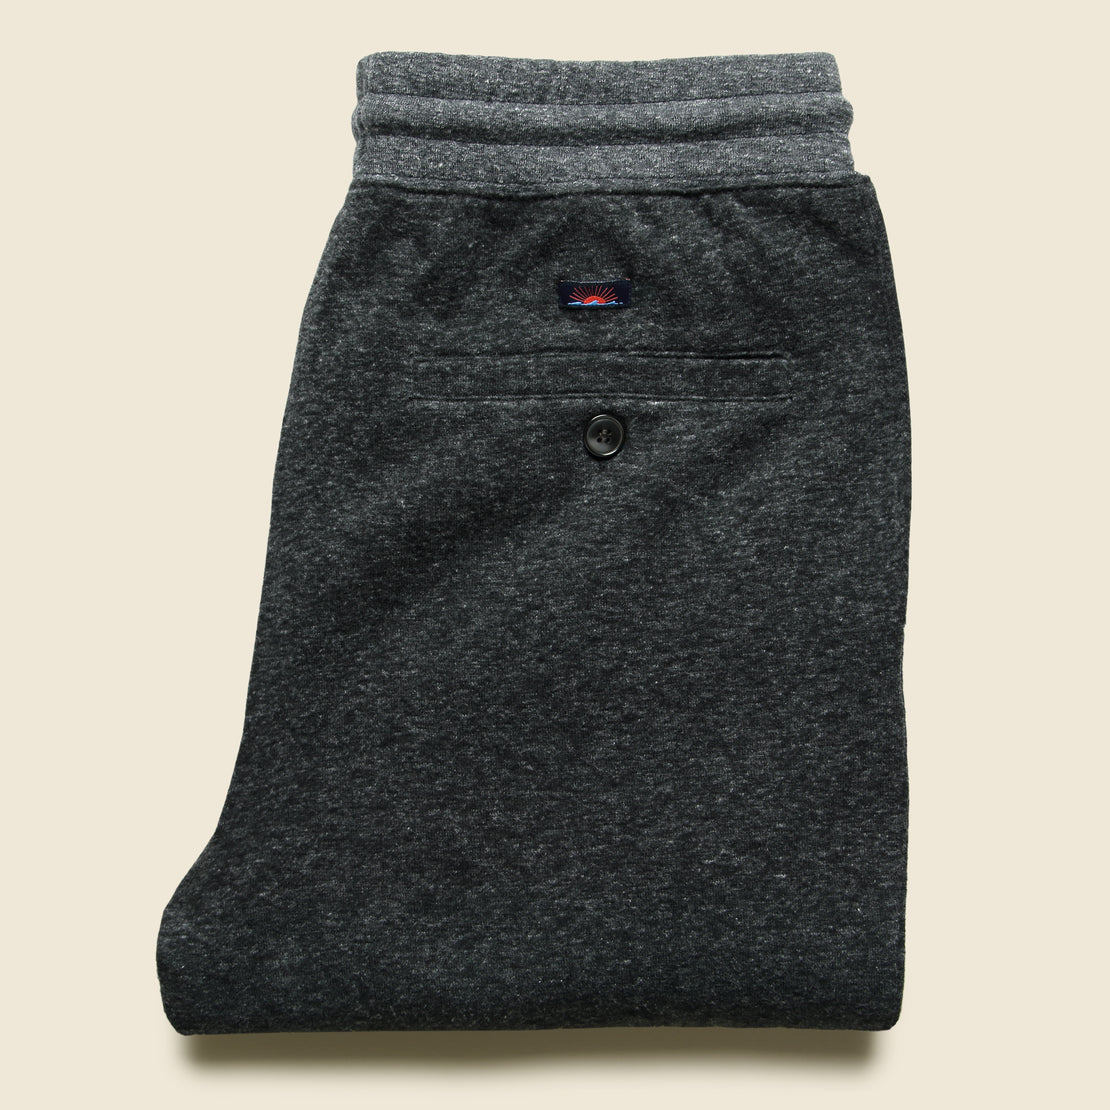 Dual Knit Sweatpant - Washed Black - Faherty - STAG Provisions - Pants - Lounge